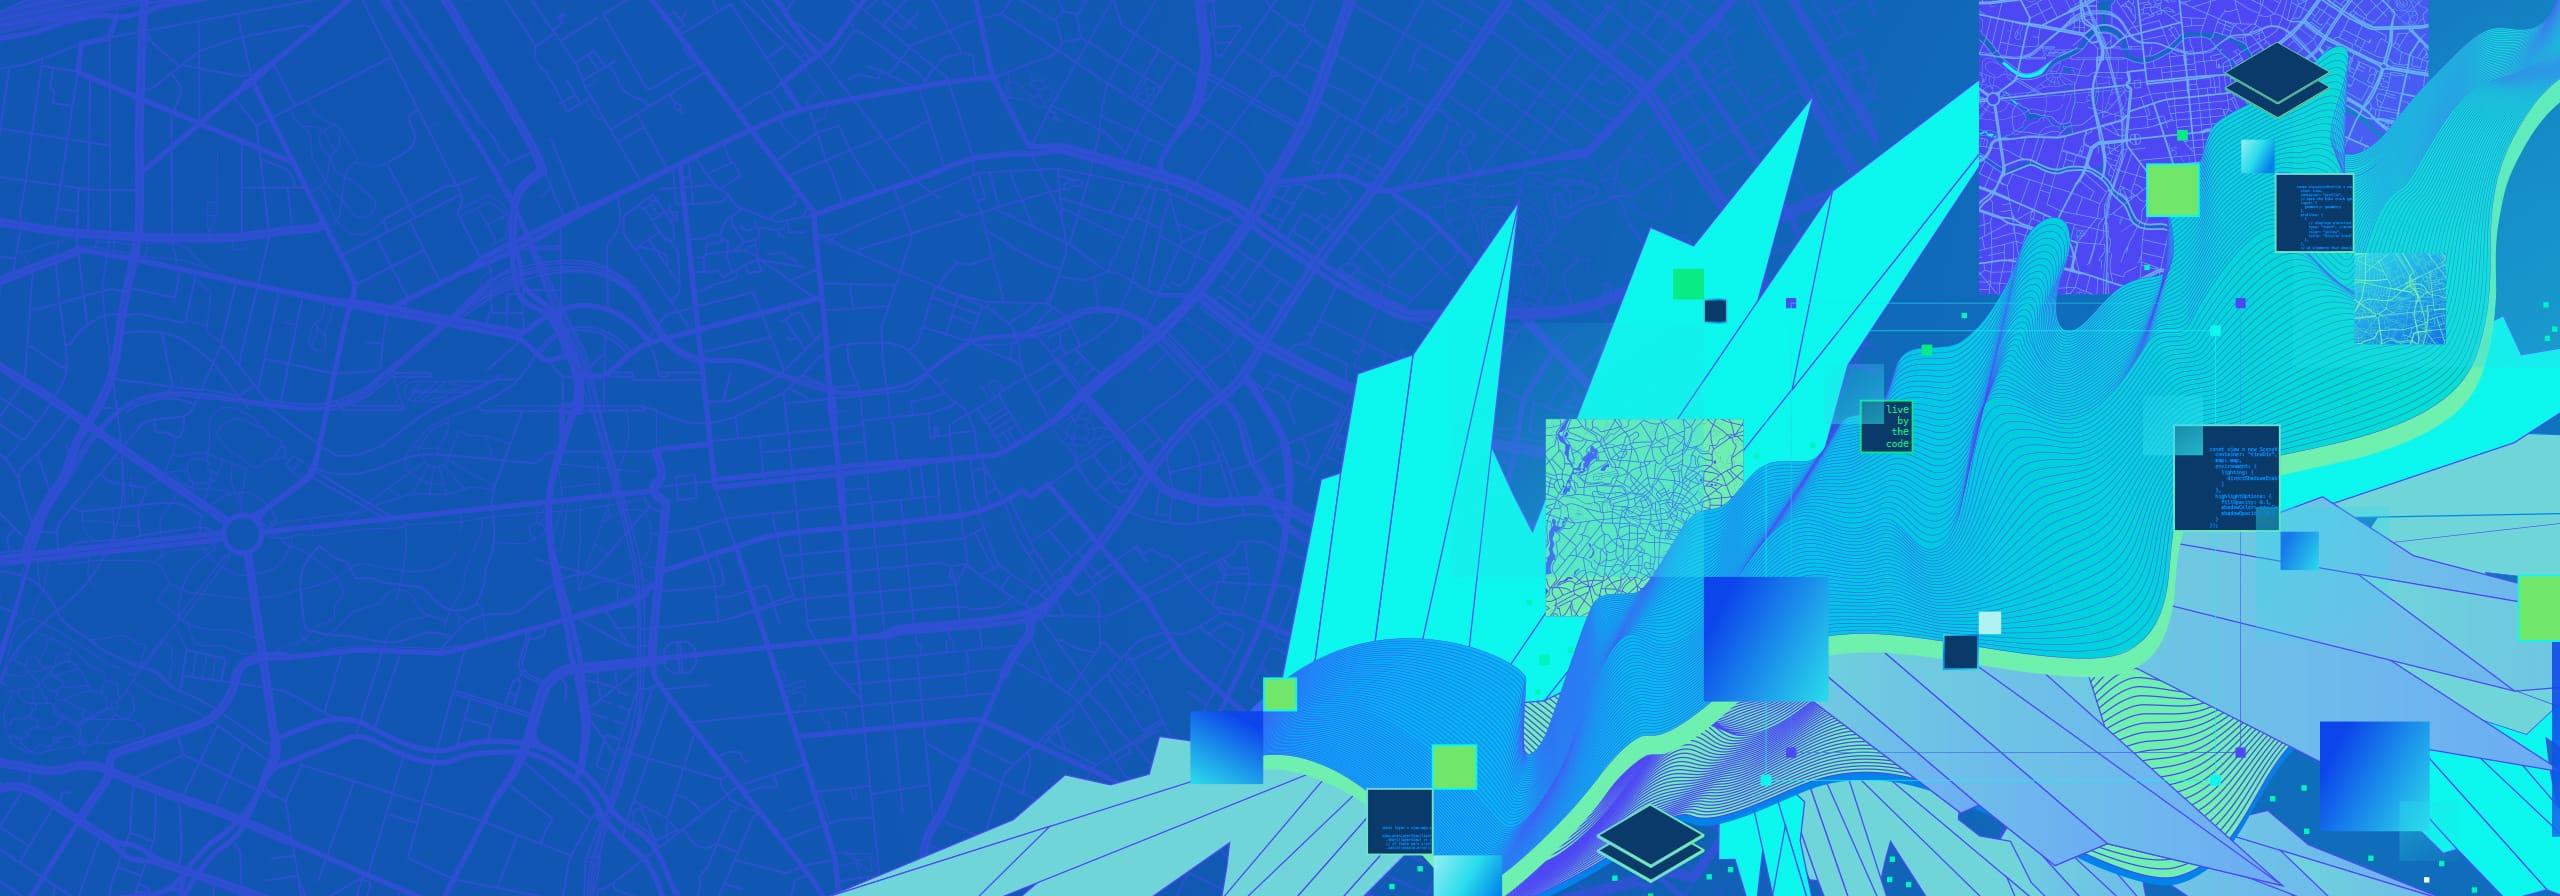 Blue, green, and aqua graphics depicting aerial view city street maps, blocks of code, wave patterns, and geometric shapes